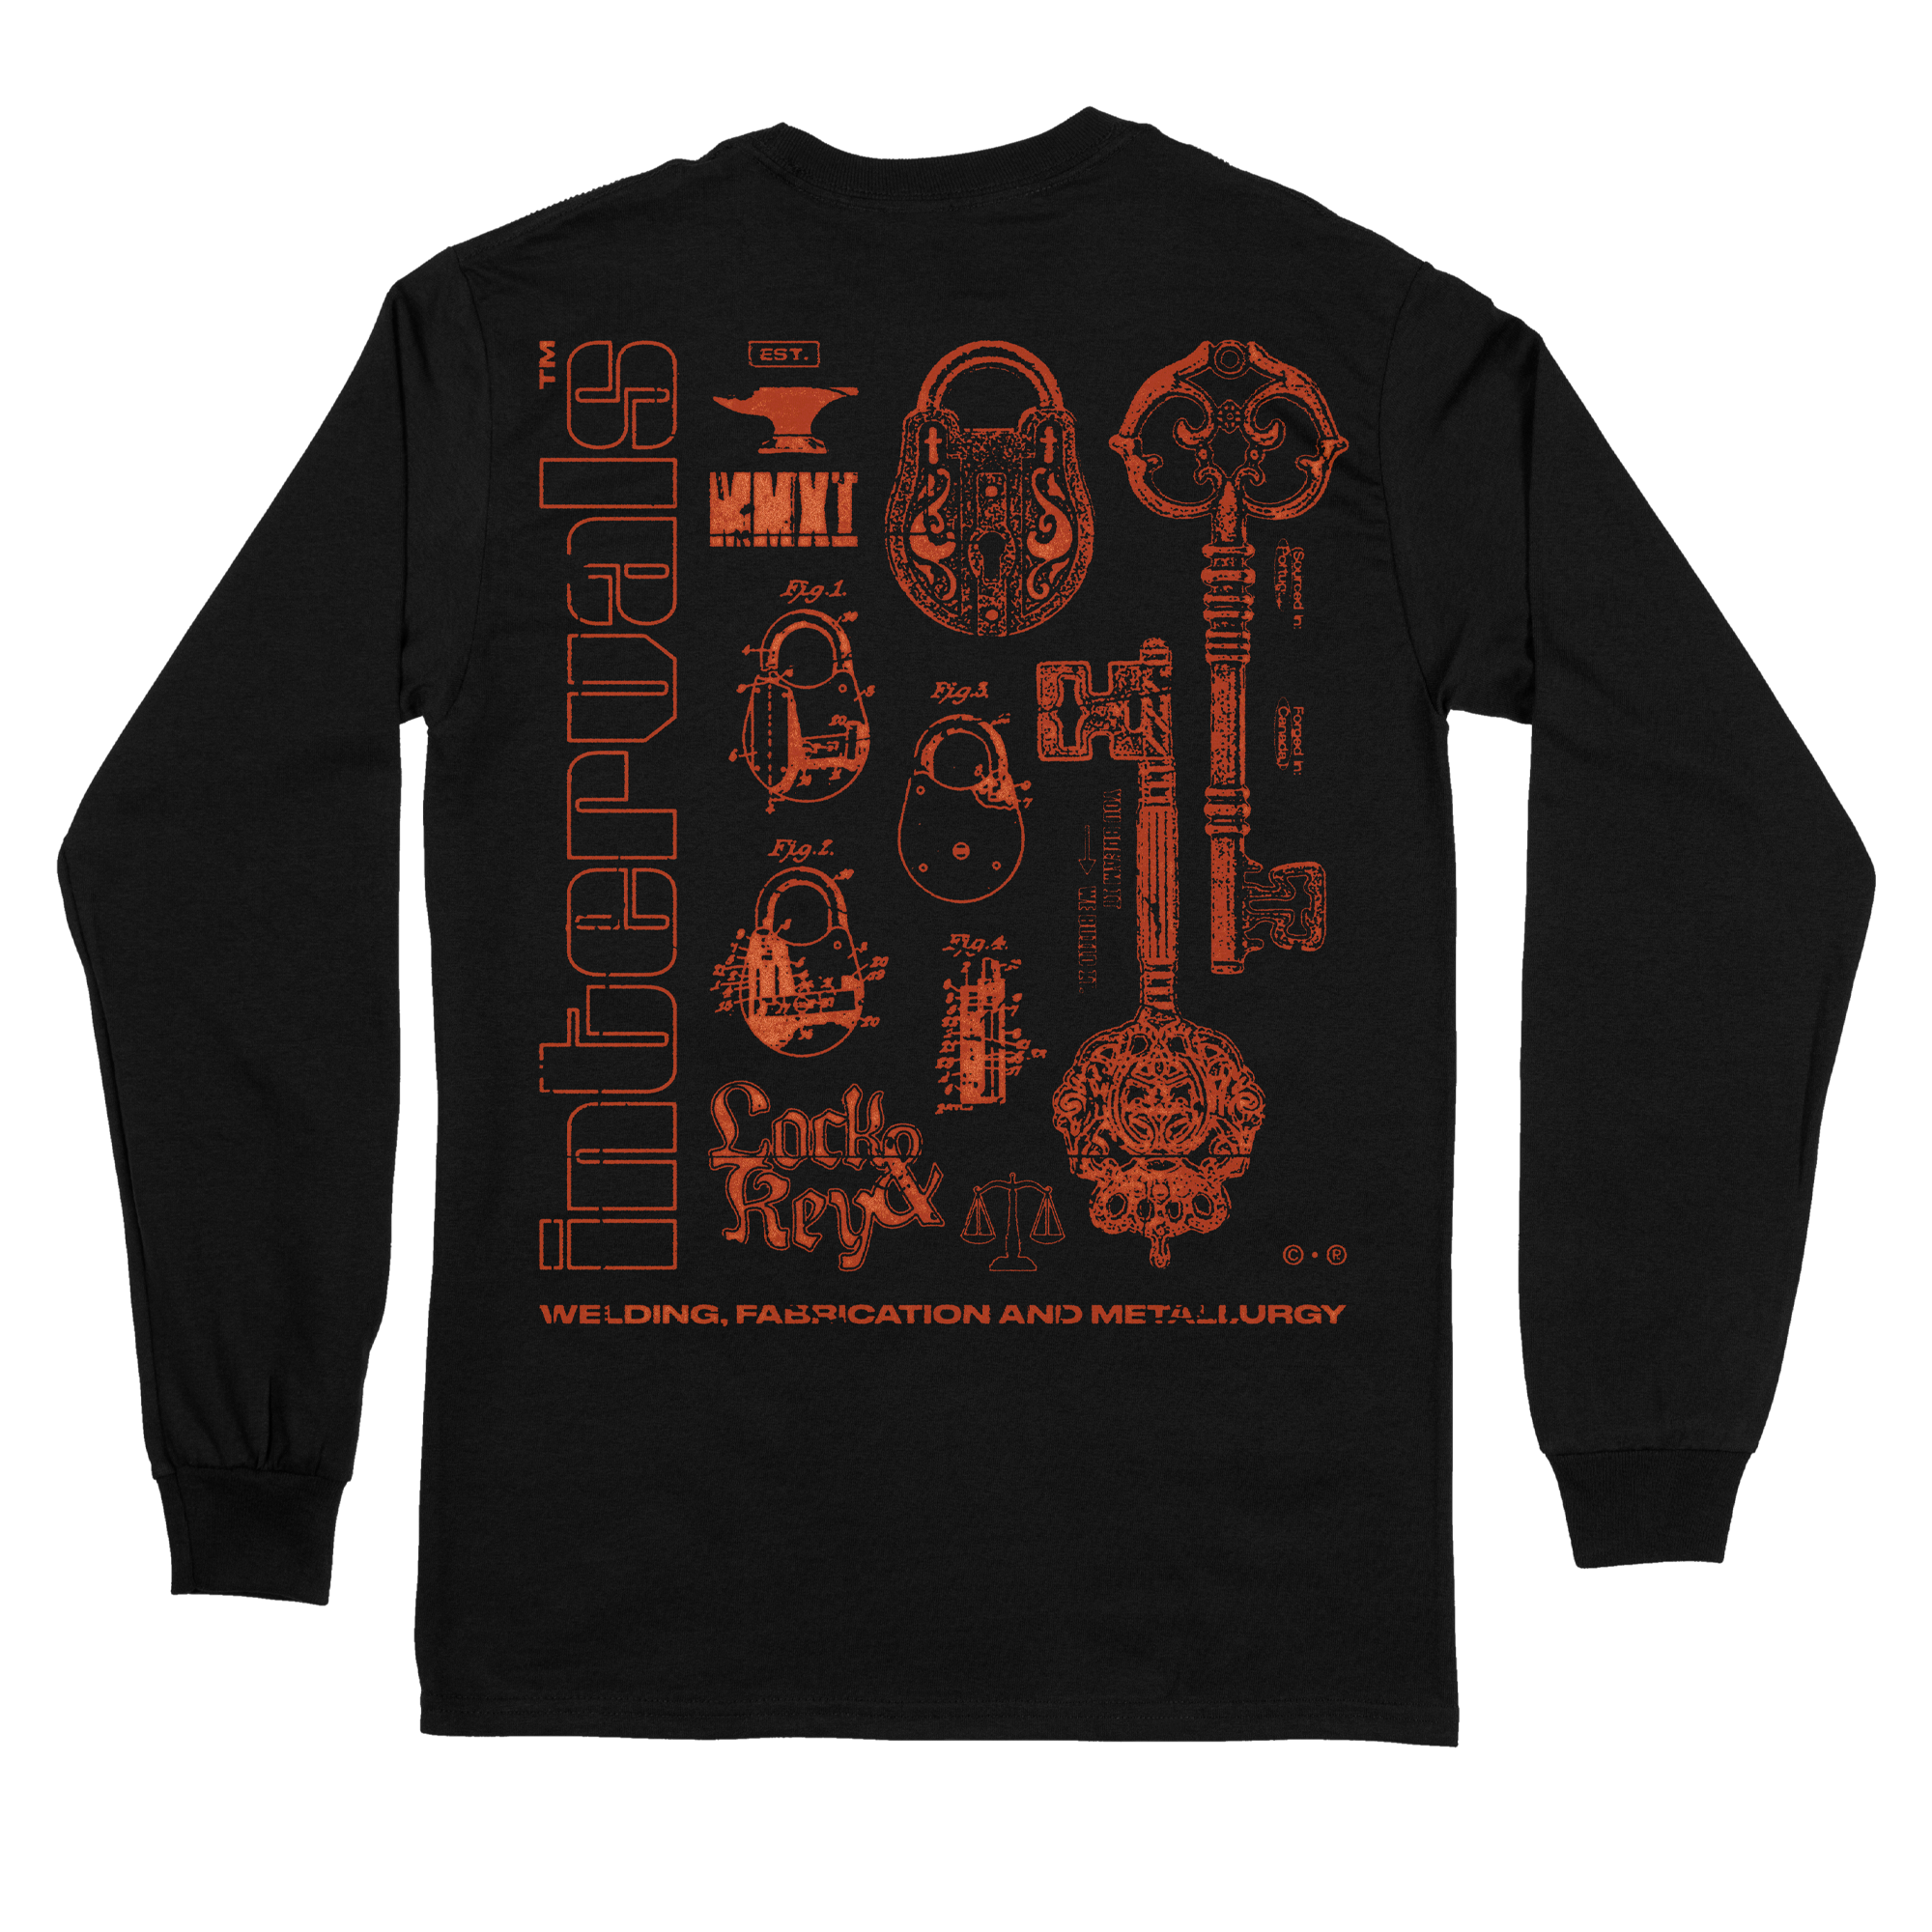 Intervals - Lock and Key Long Sleeve